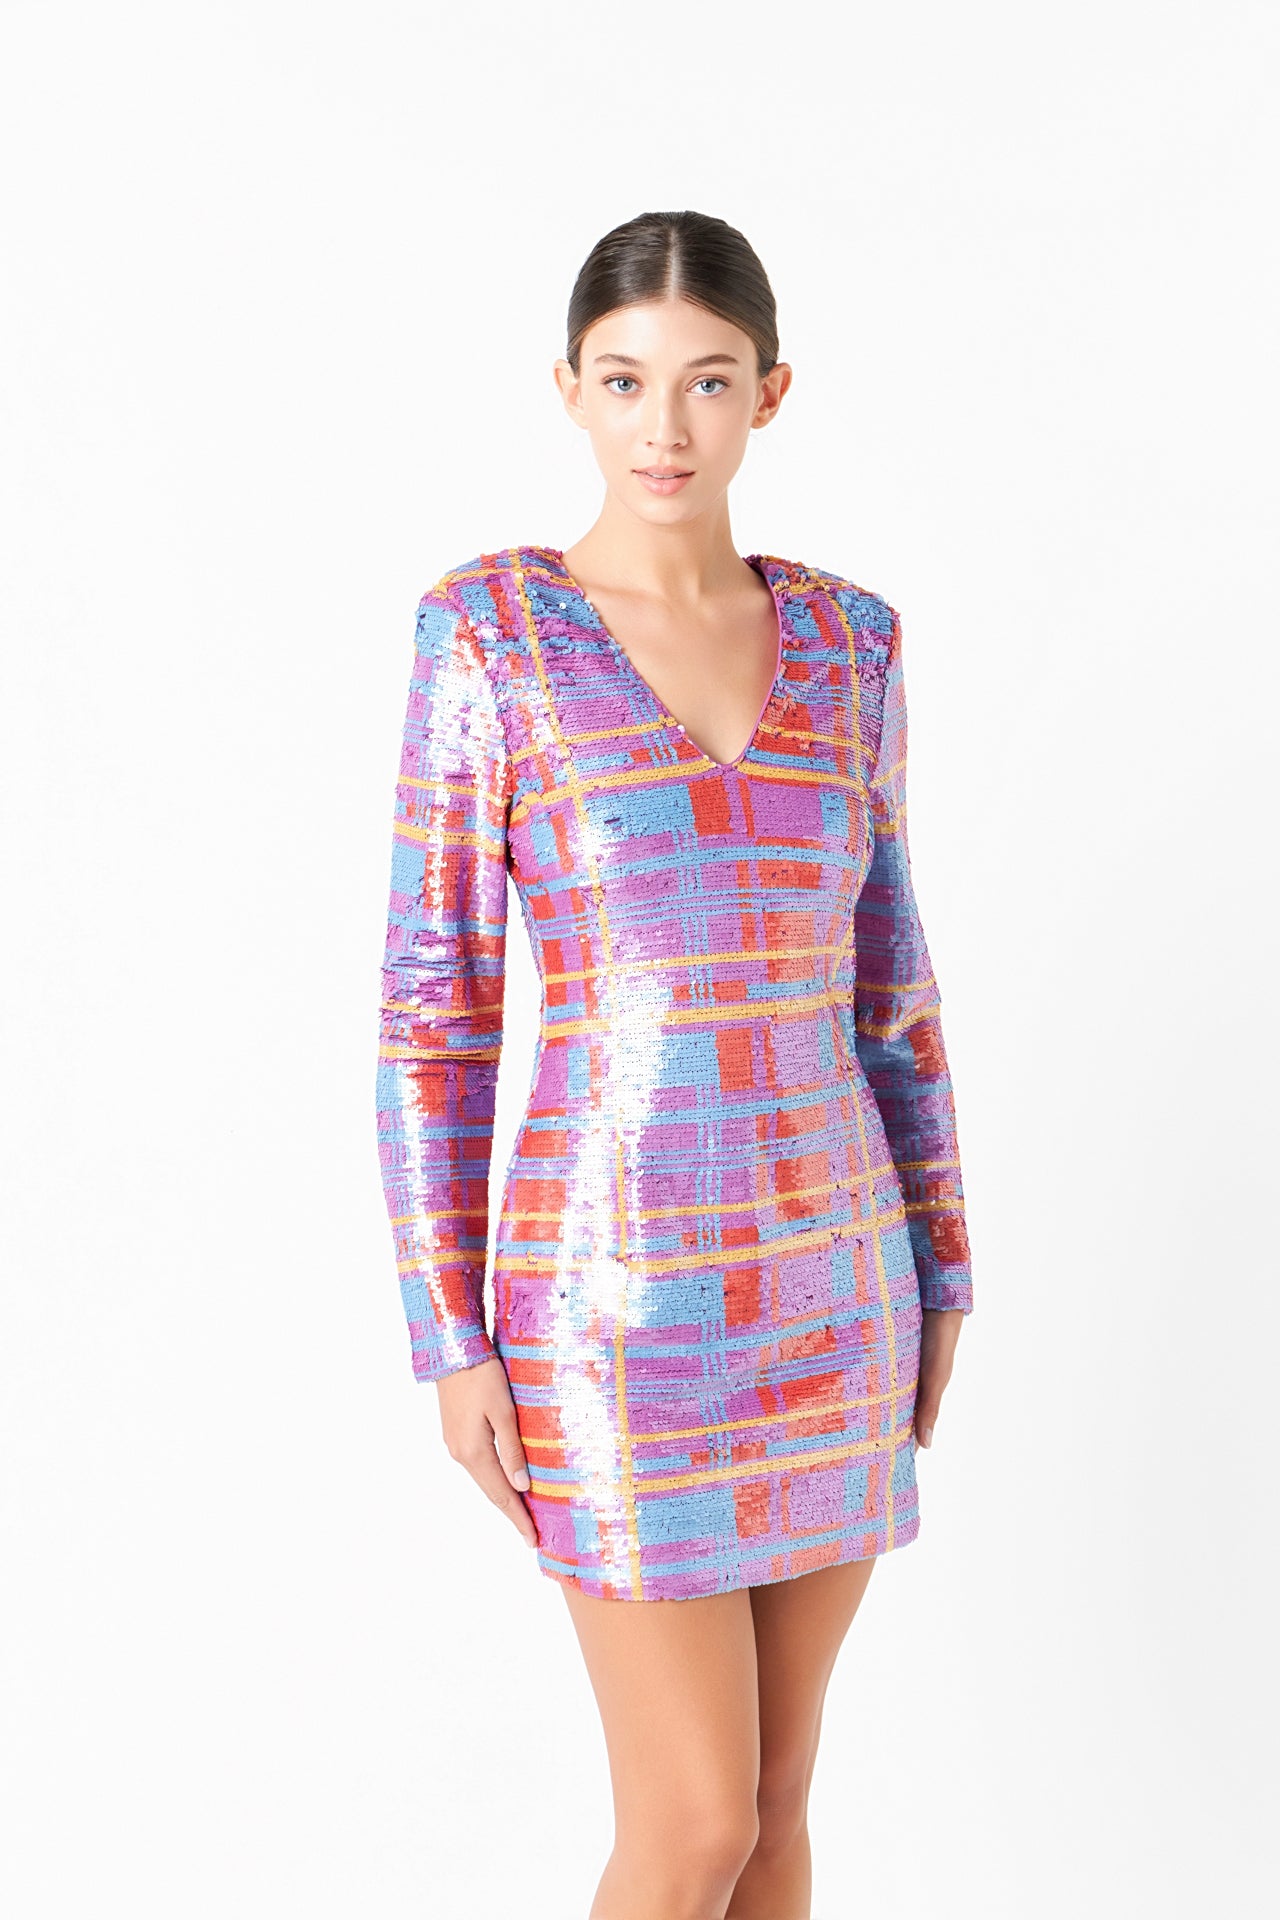 ENDLESS ROSE - Check Pattern Sequins Dress - DRESSES available at Objectrare